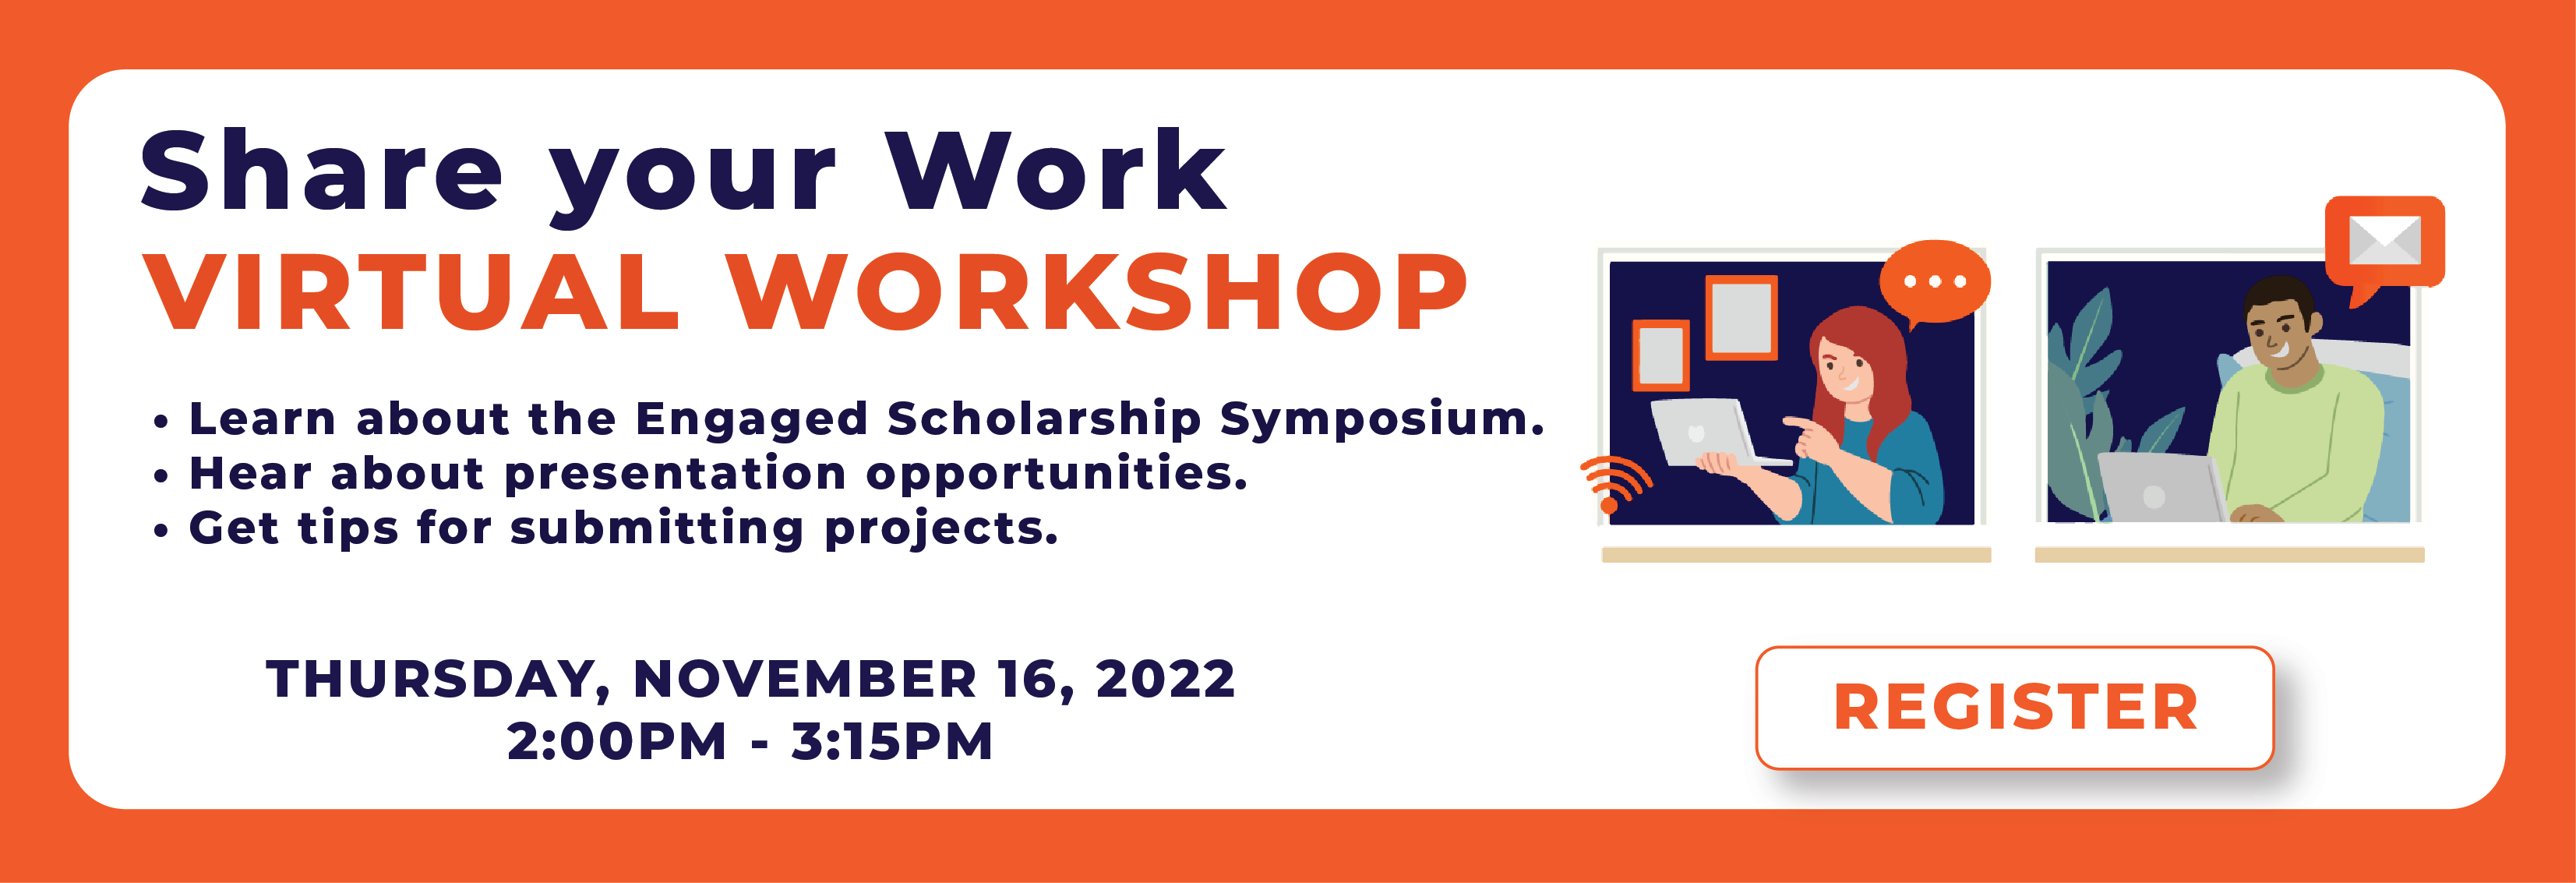 Share your Work Virtual Workshop on Thursday November 16 at 2pm.